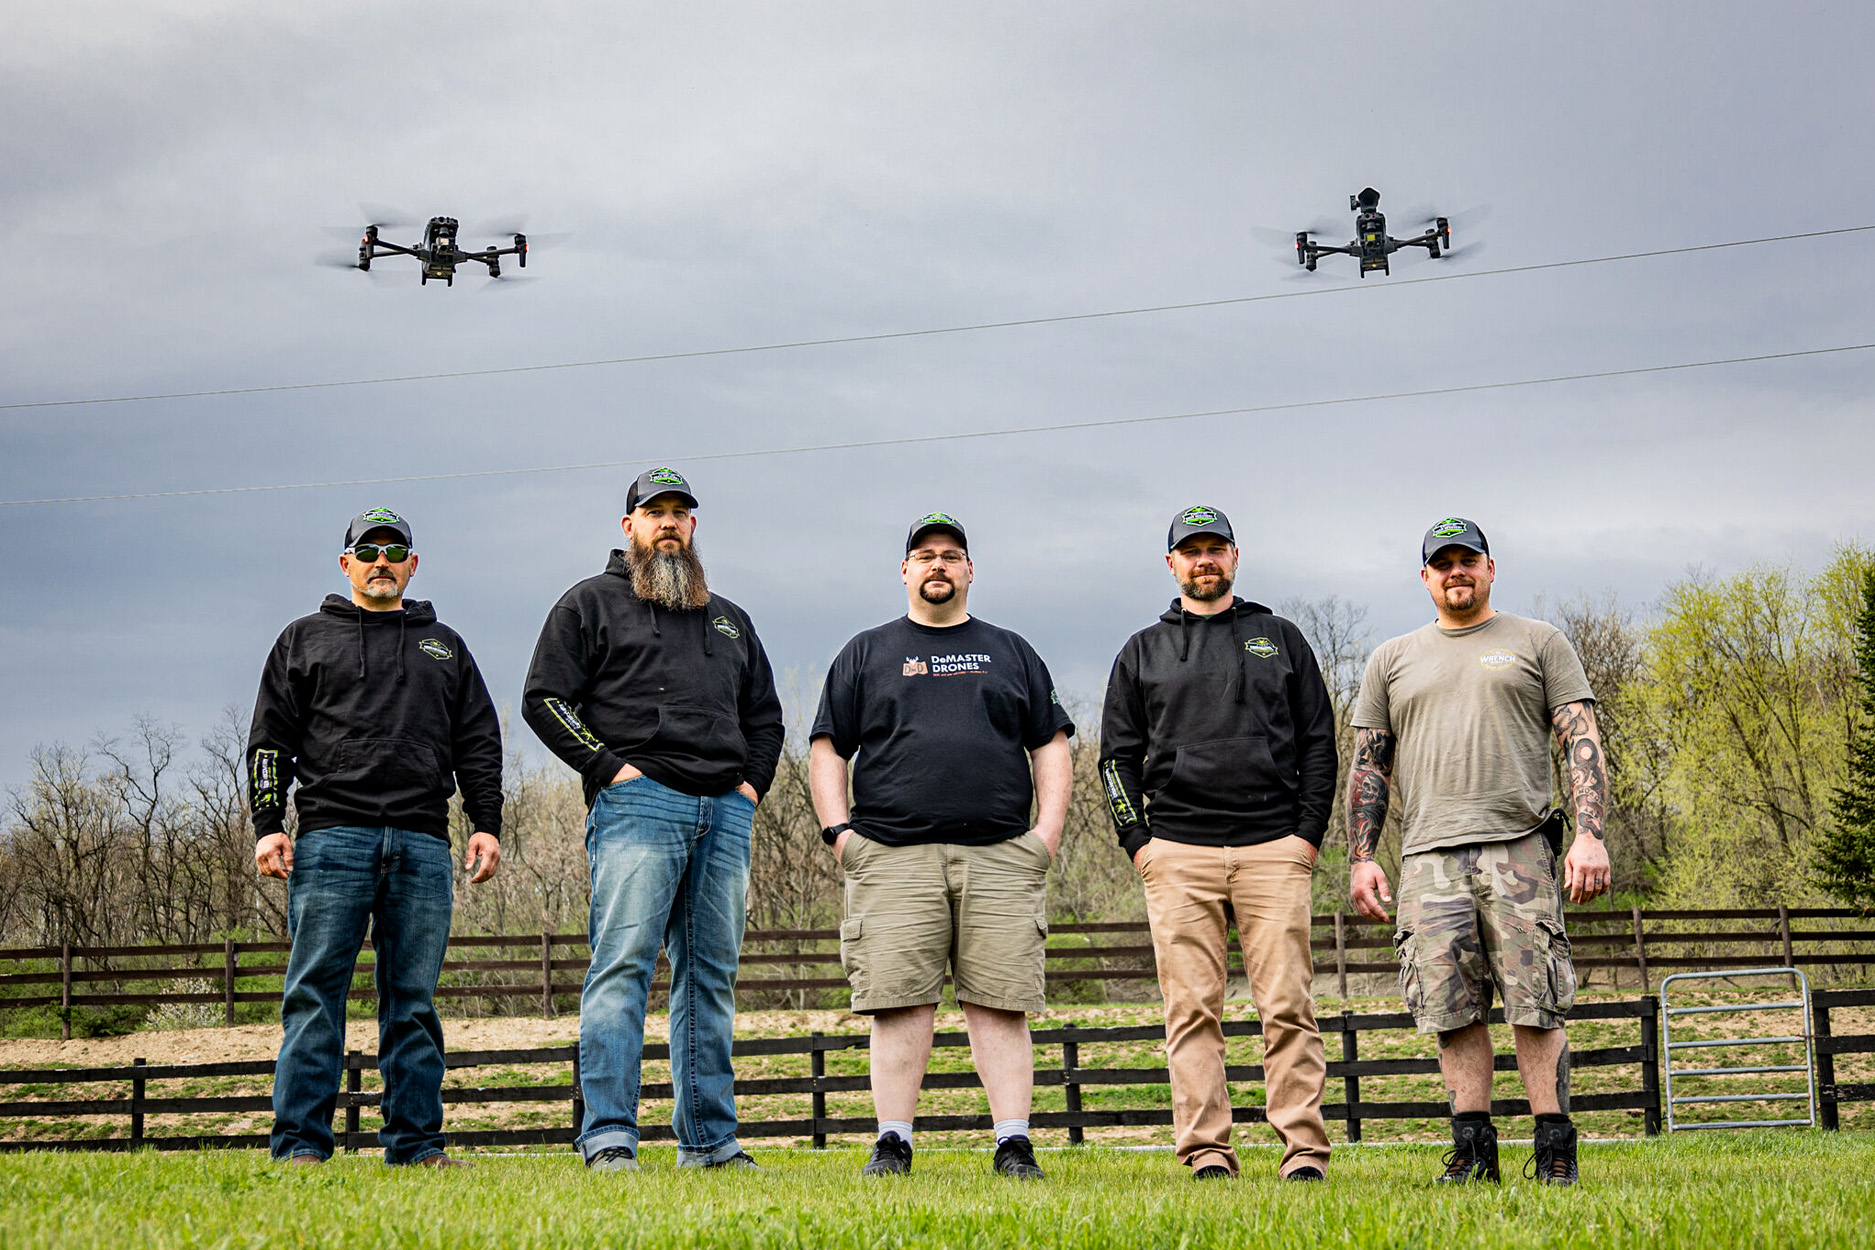 Five licensed drone pilots with drones flying overhead.